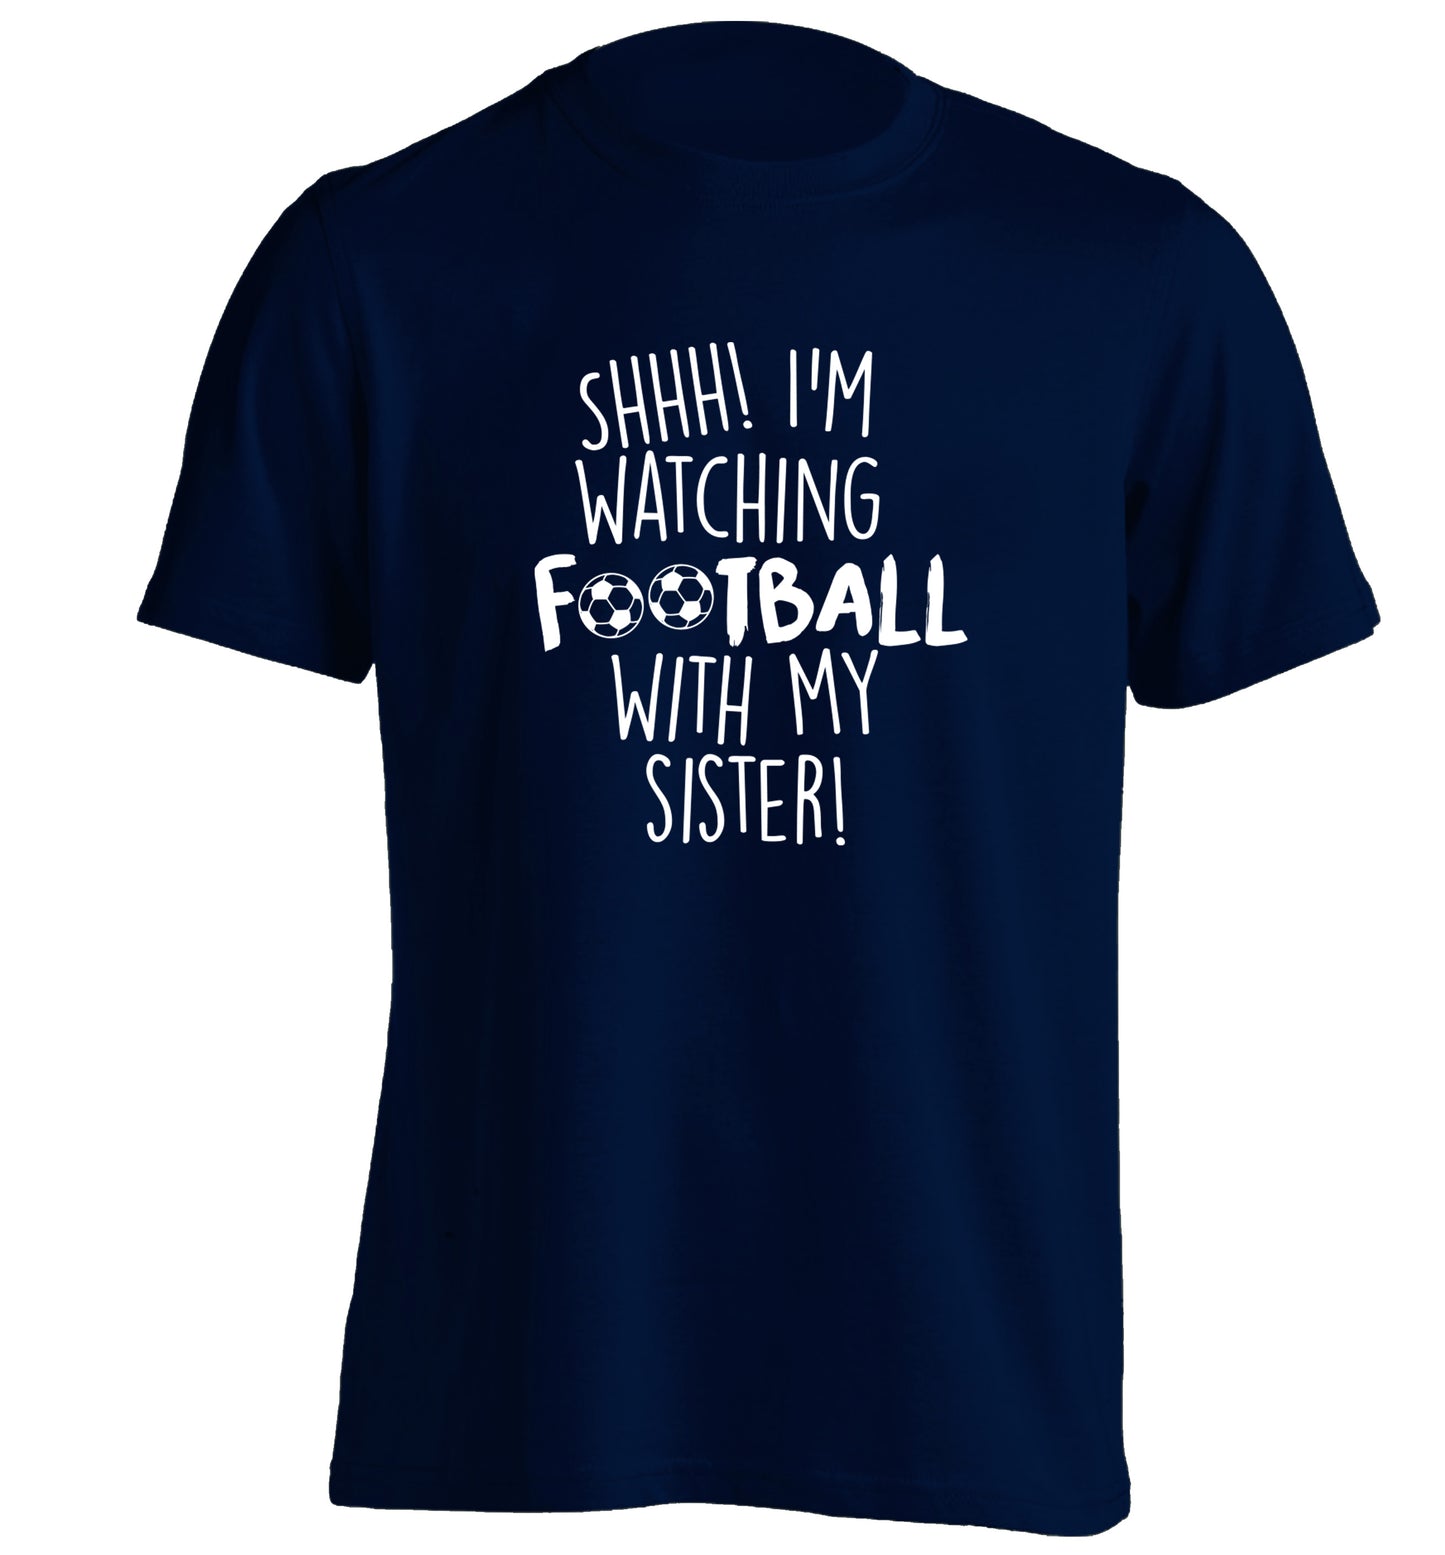 Shhh I'm watching football with my sister adults unisexnavy Tshirt 2XL